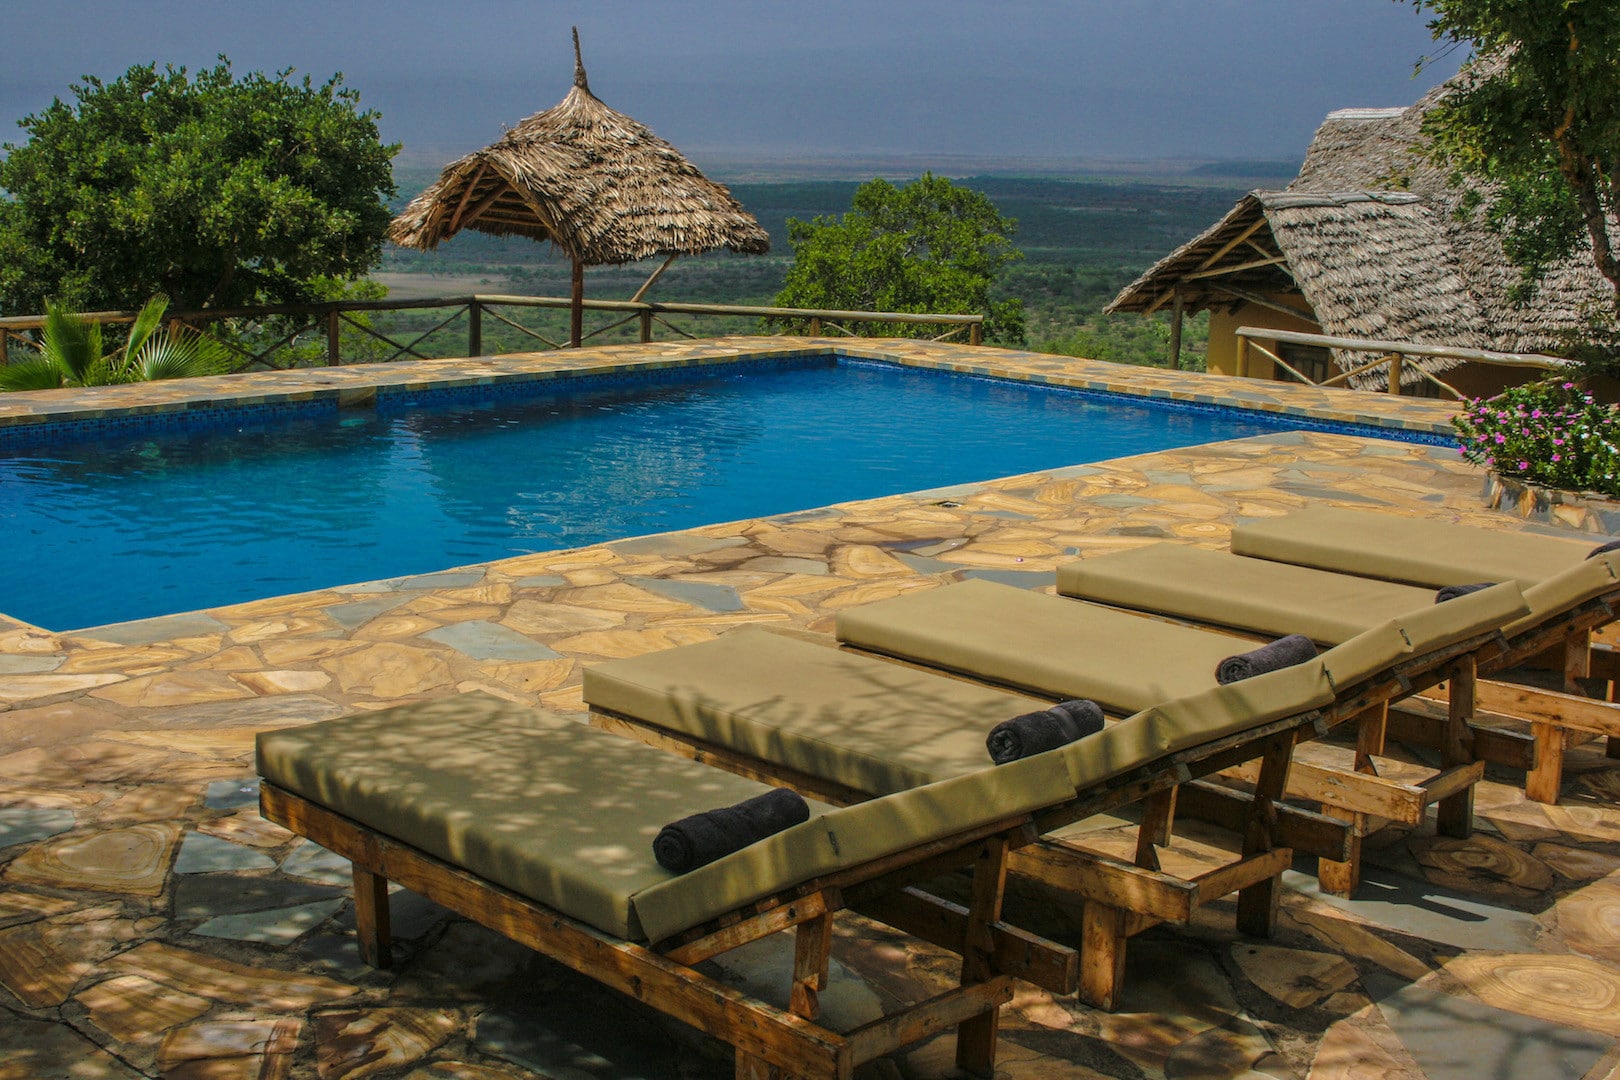 Morona Hill Lodge pool and view Rift Valley